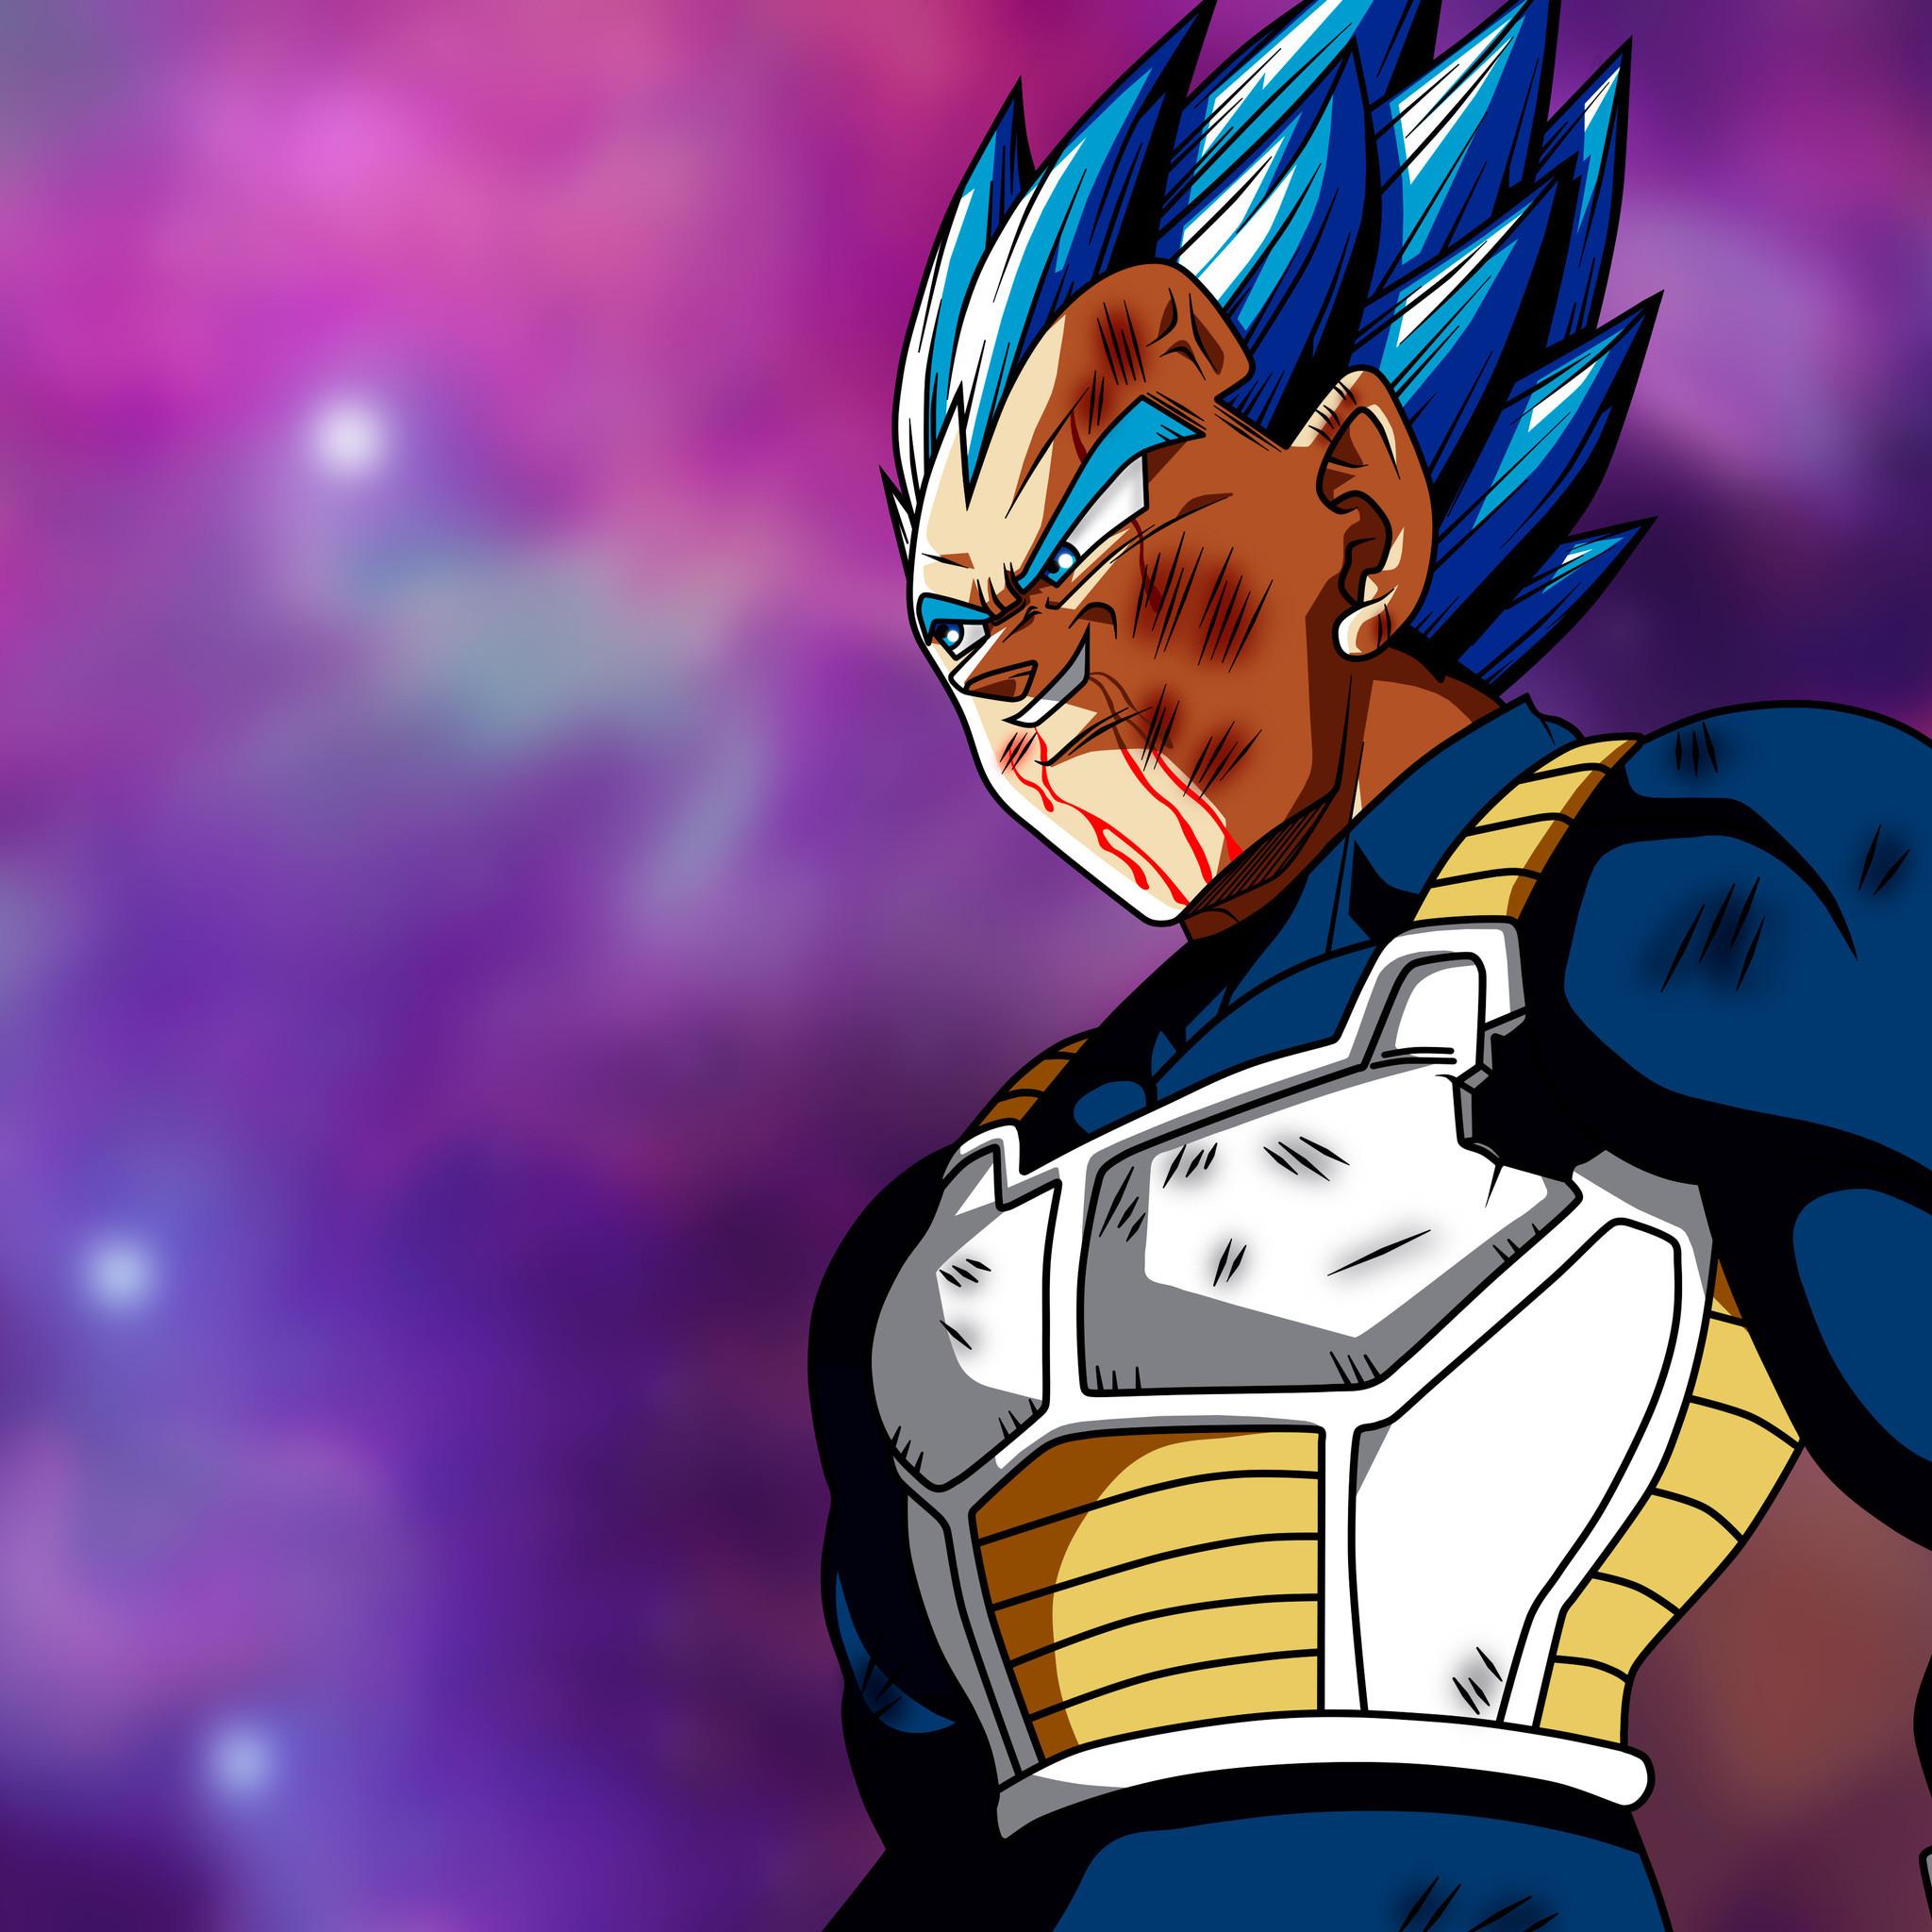 2048 x 2048 · jpeg - Vegeta Wallpaper for Android (76+ images)